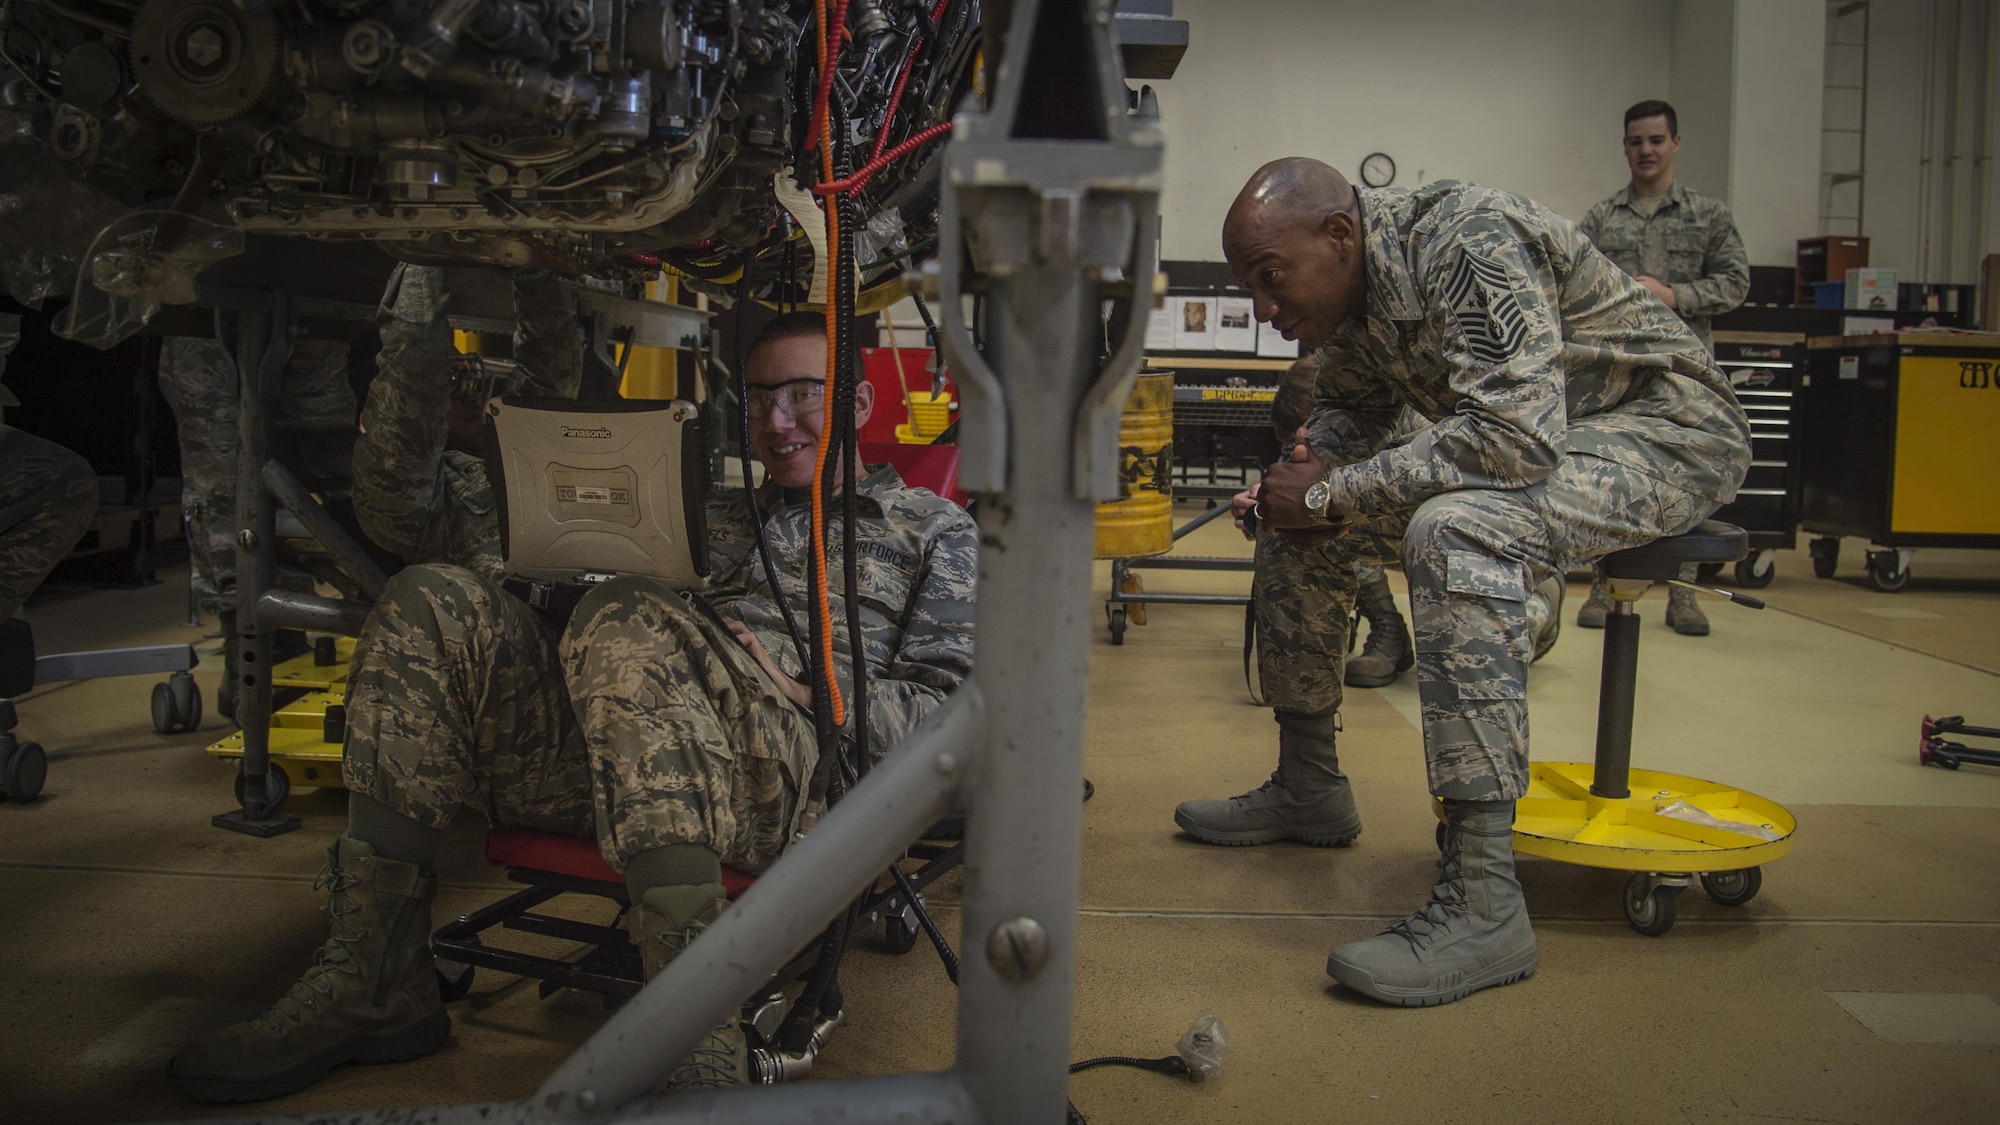 Chief Master Sgt. of the Air Force Kaleth O. Wright speaks with Airman 1st Class Jeremy Daniels, 35th Maintenance Squadron aerospace propulsion journeyman, during his Pacific Air Forces’ immersion tour at Misawa Air Base, Japan, June 9, 2017. Wright toured various work centers, focusing his visit on innovative Airmen who contribute to the overall growth of the Air Force. He also sat with Airmen and NCO’s to learn more about their concerns about the Air Force. (U.S. Air Force photo by Senior Airman Deana Heitzman)